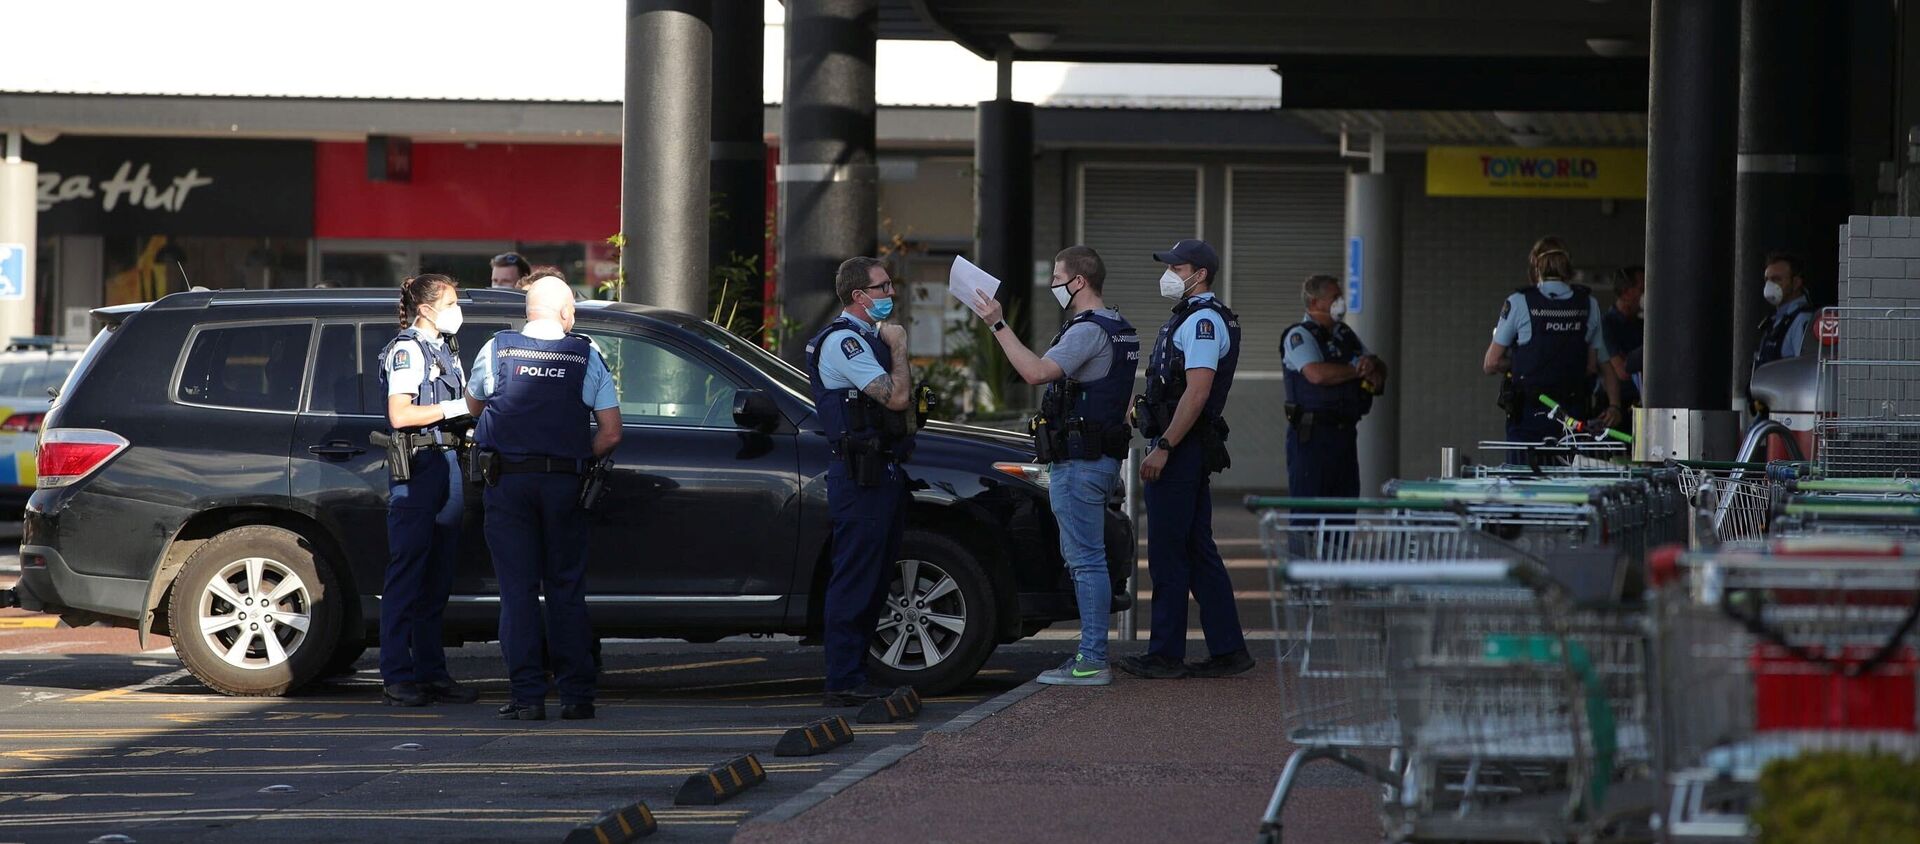 Police respond to the scene of an attack carried out by a man shot dead by police after he injured multiple people at a shopping mall in Auckland, New Zealand, 3 September 2021. - Sputnik International, 1920, 03.09.2021